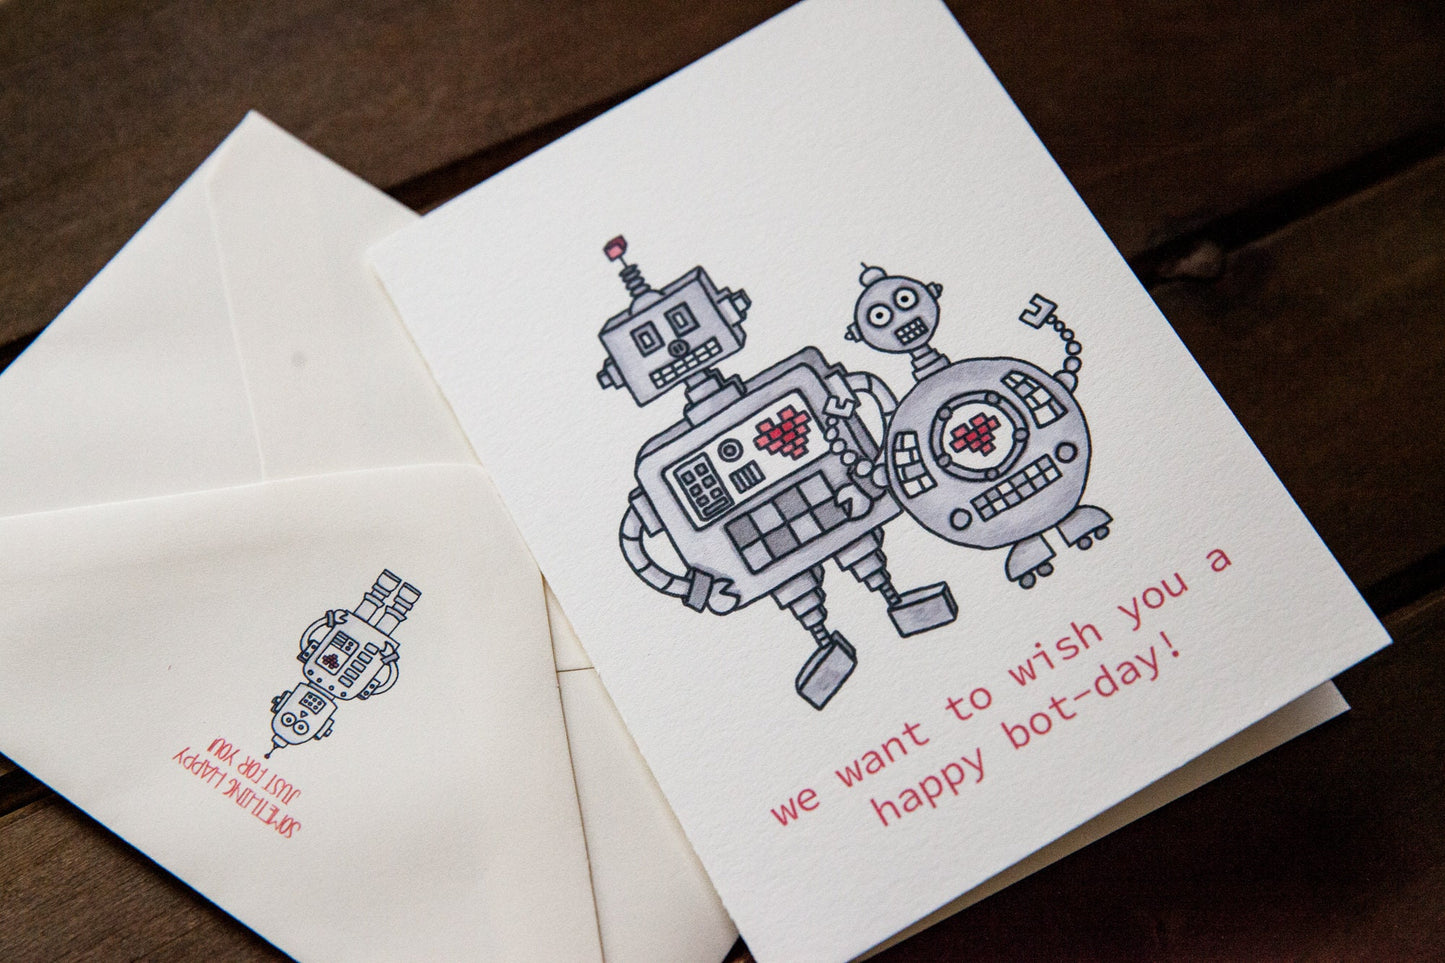 Happy Bot-Day Group Birthday Card